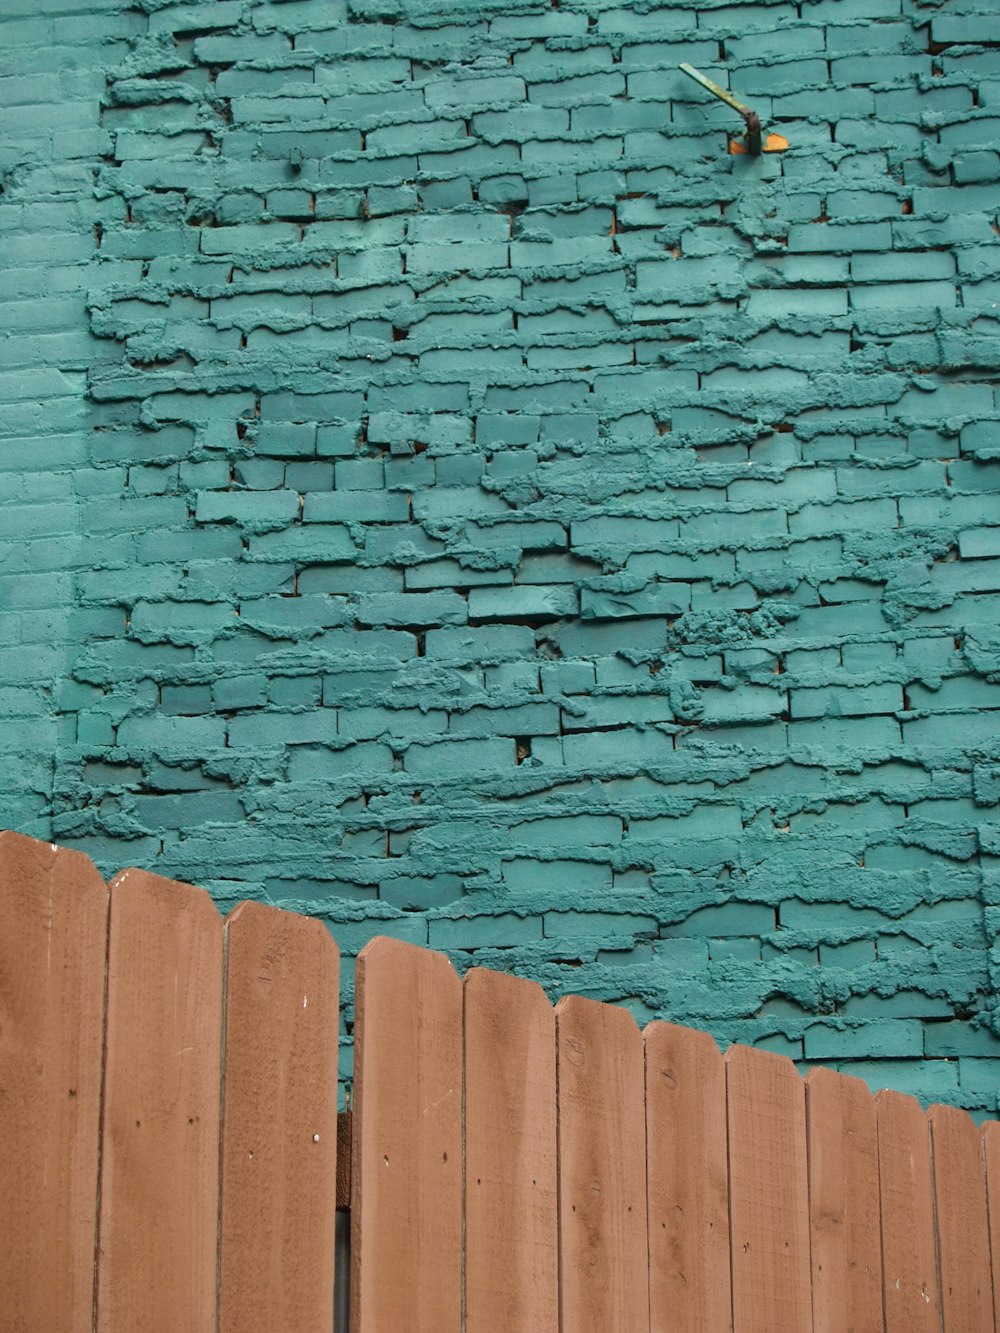 a wooden fence next to a blue brick wall